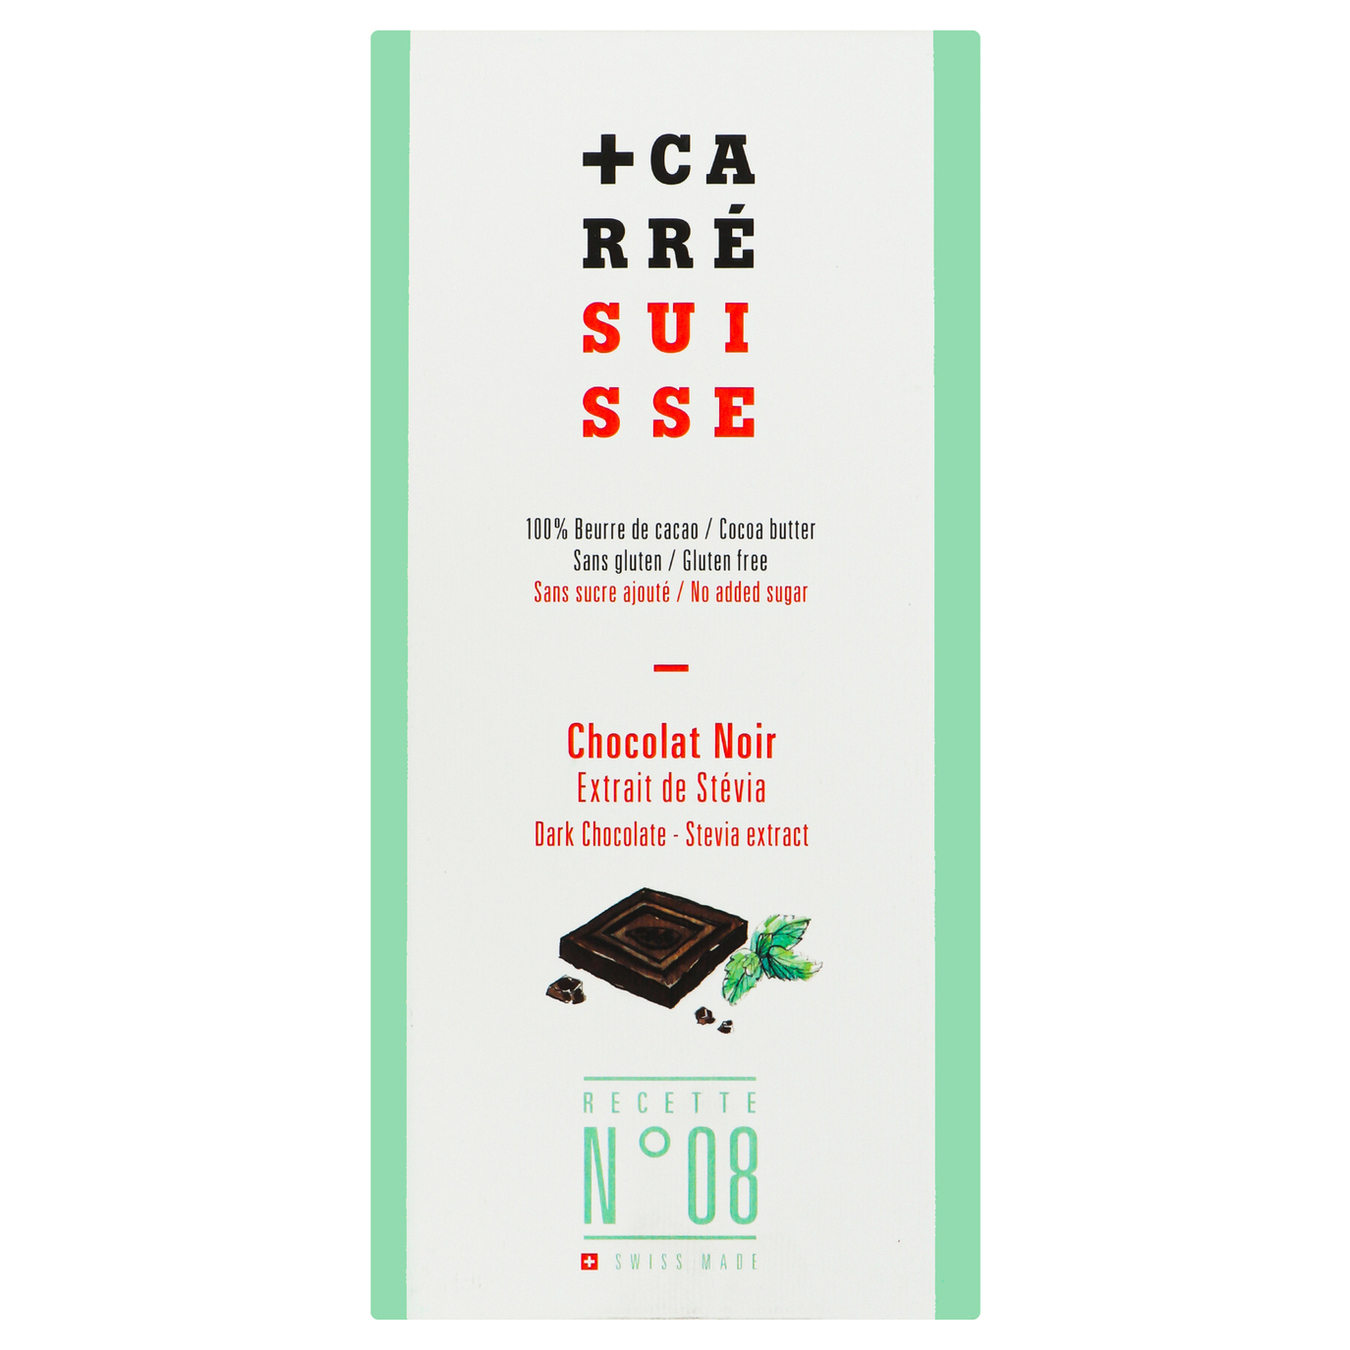 Black Chocolate Carre Suisse With Sweeteners 100g